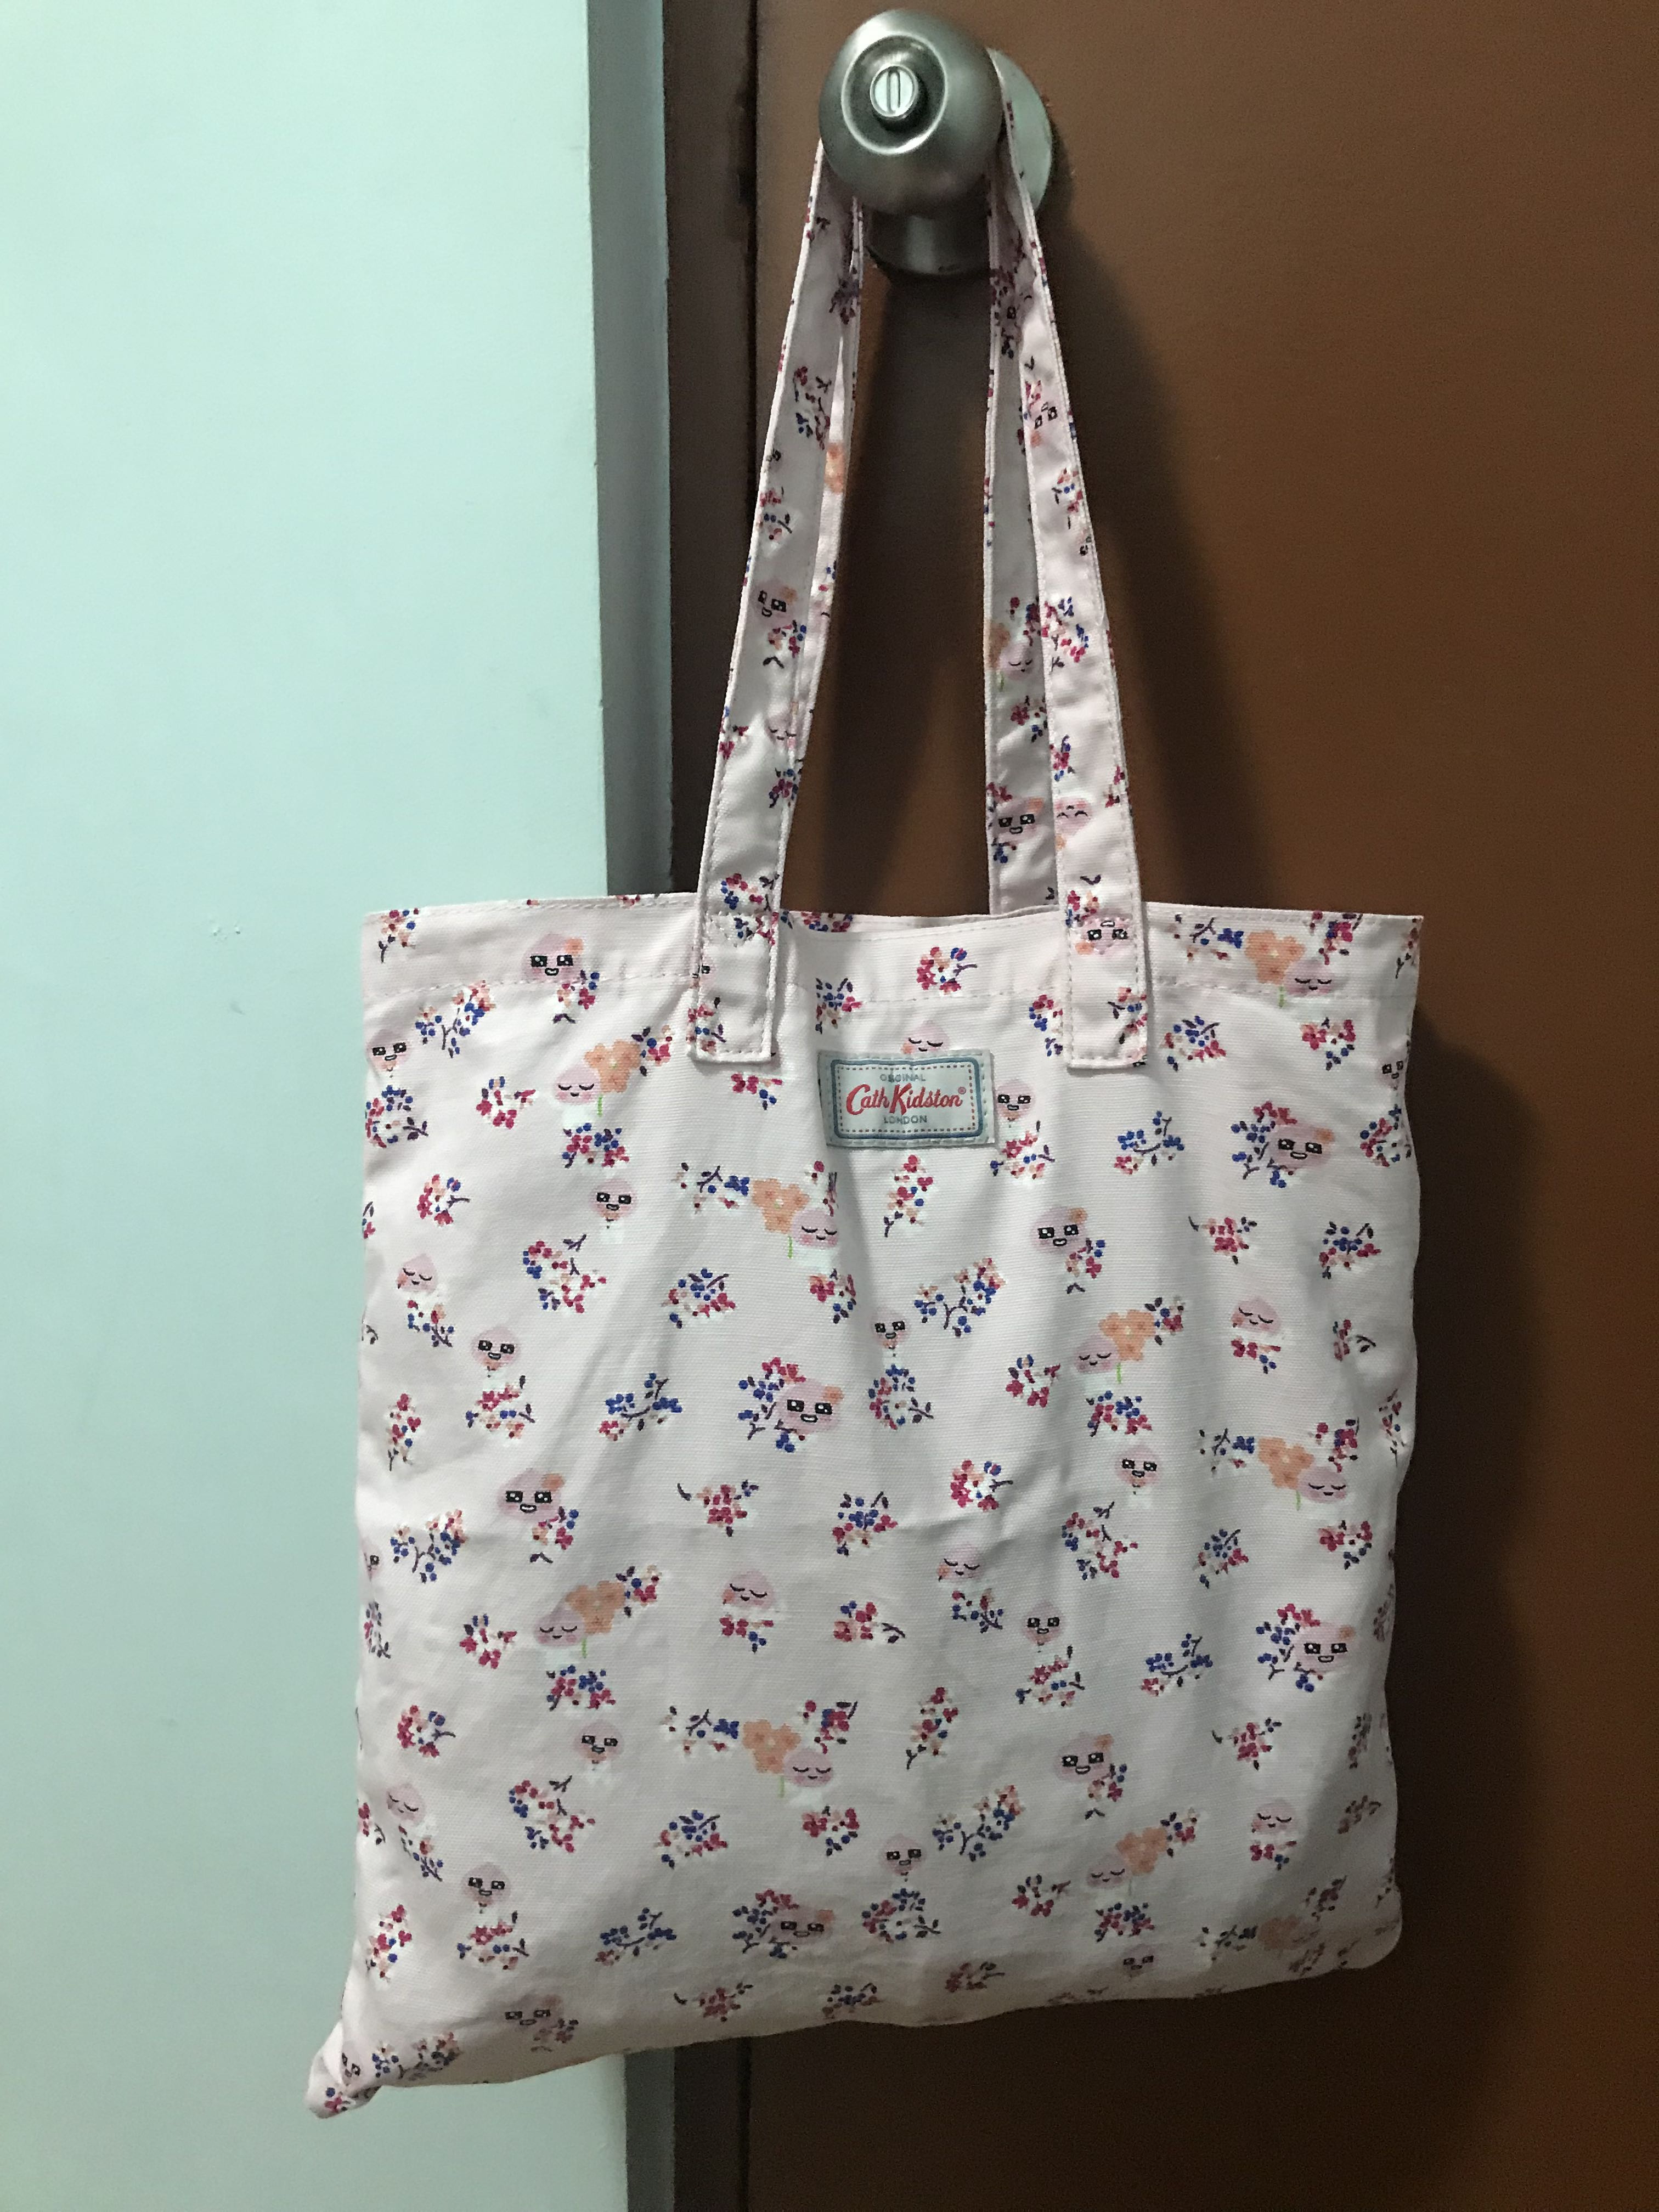 Shop Cath Kidston Women's Leather Bags up to 65% Off | DealDoodle